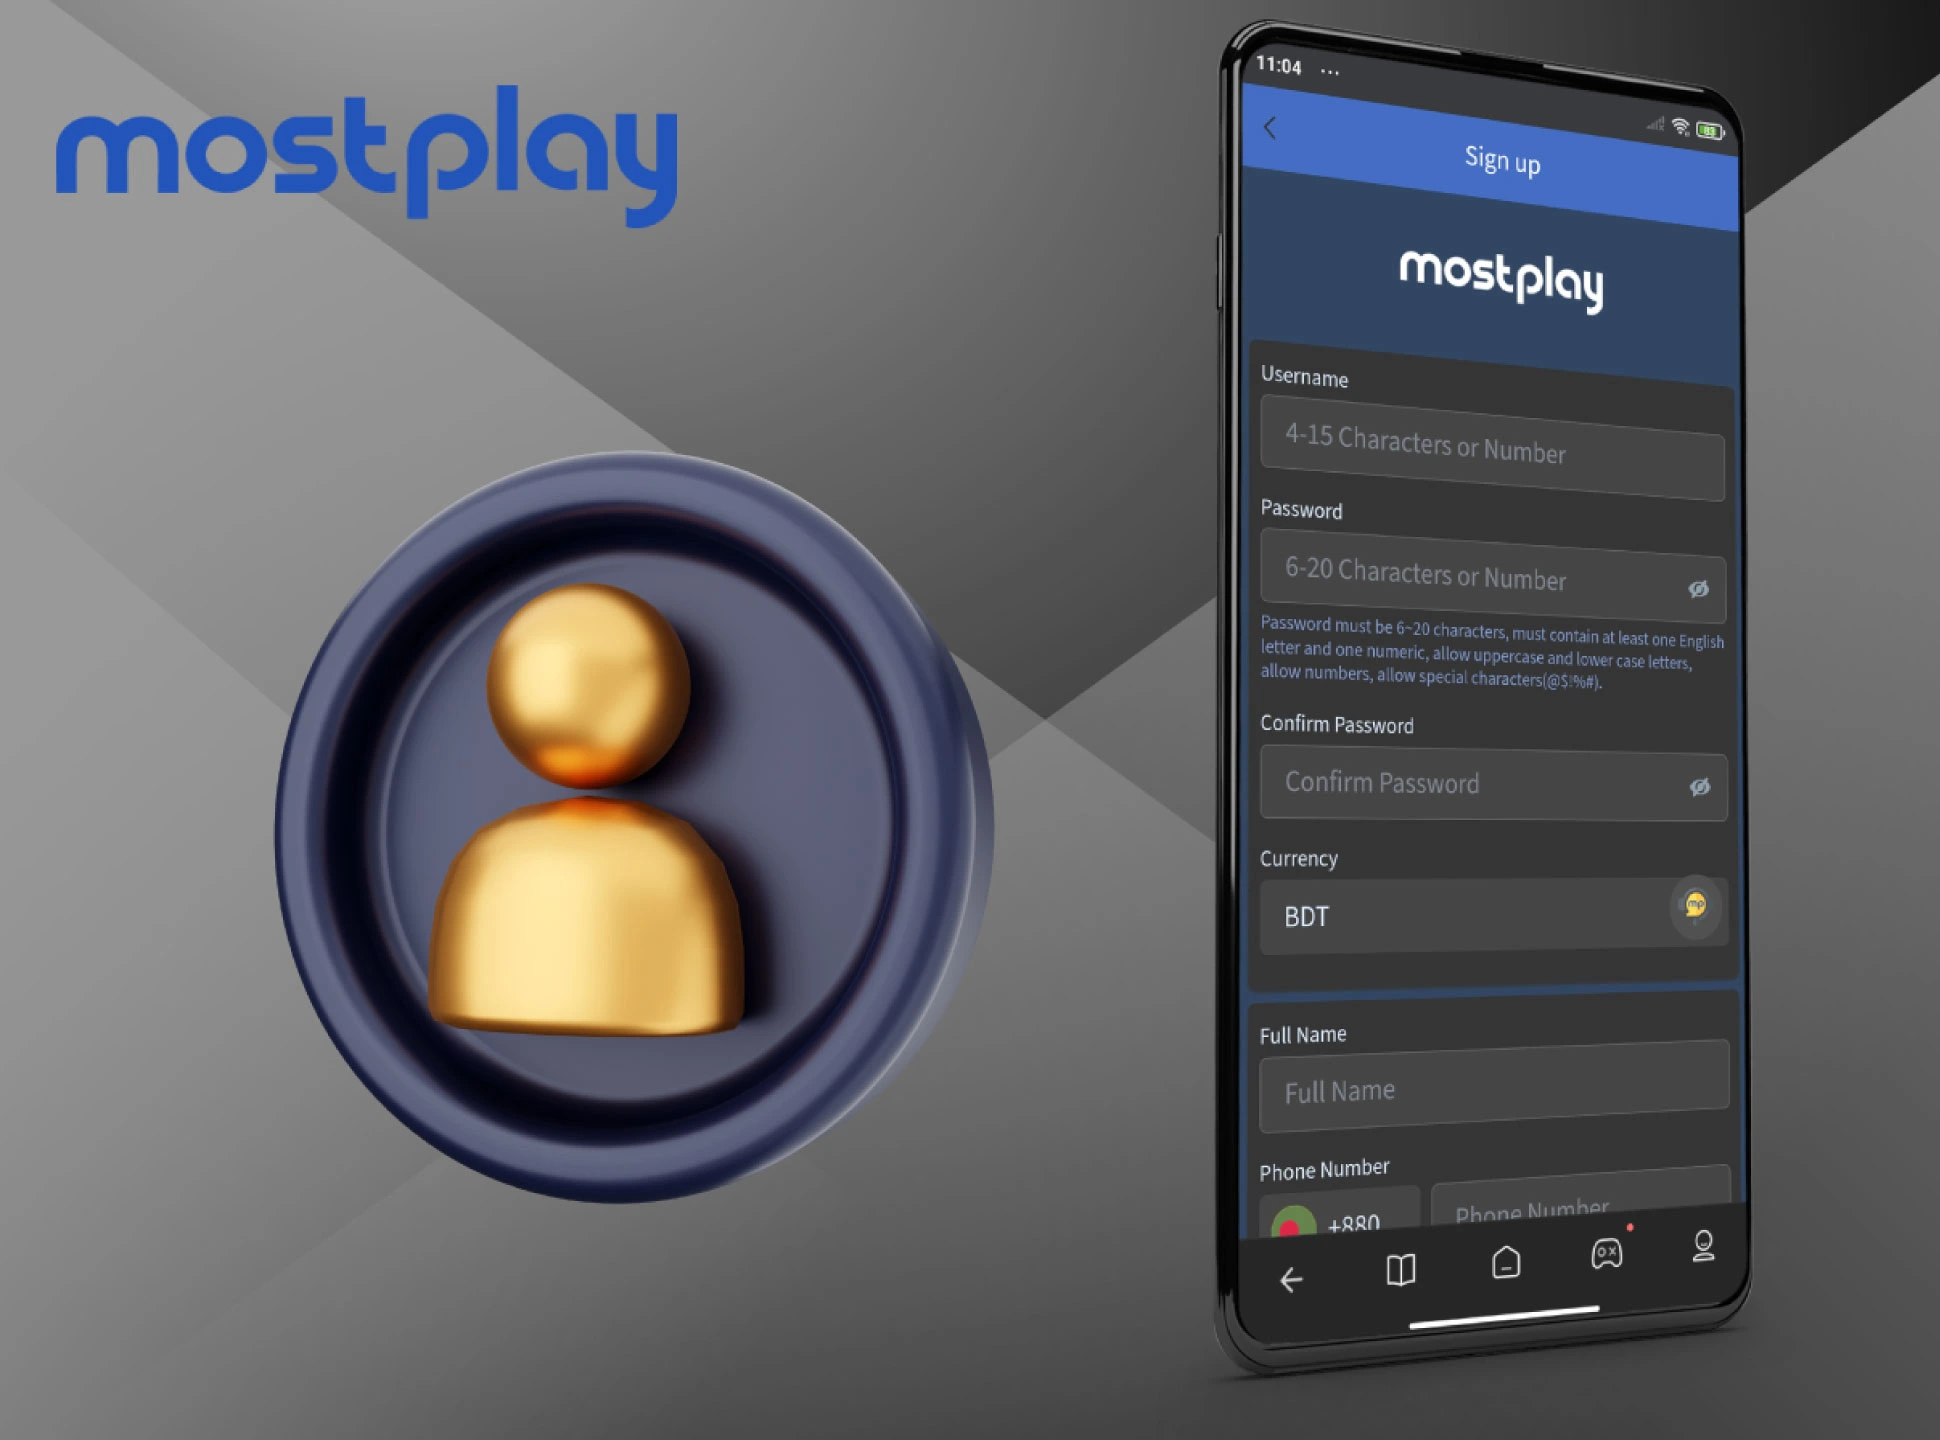 In order to start betting or playing in the casino, you need to create a Mostplay account, if you have one - just log in there.